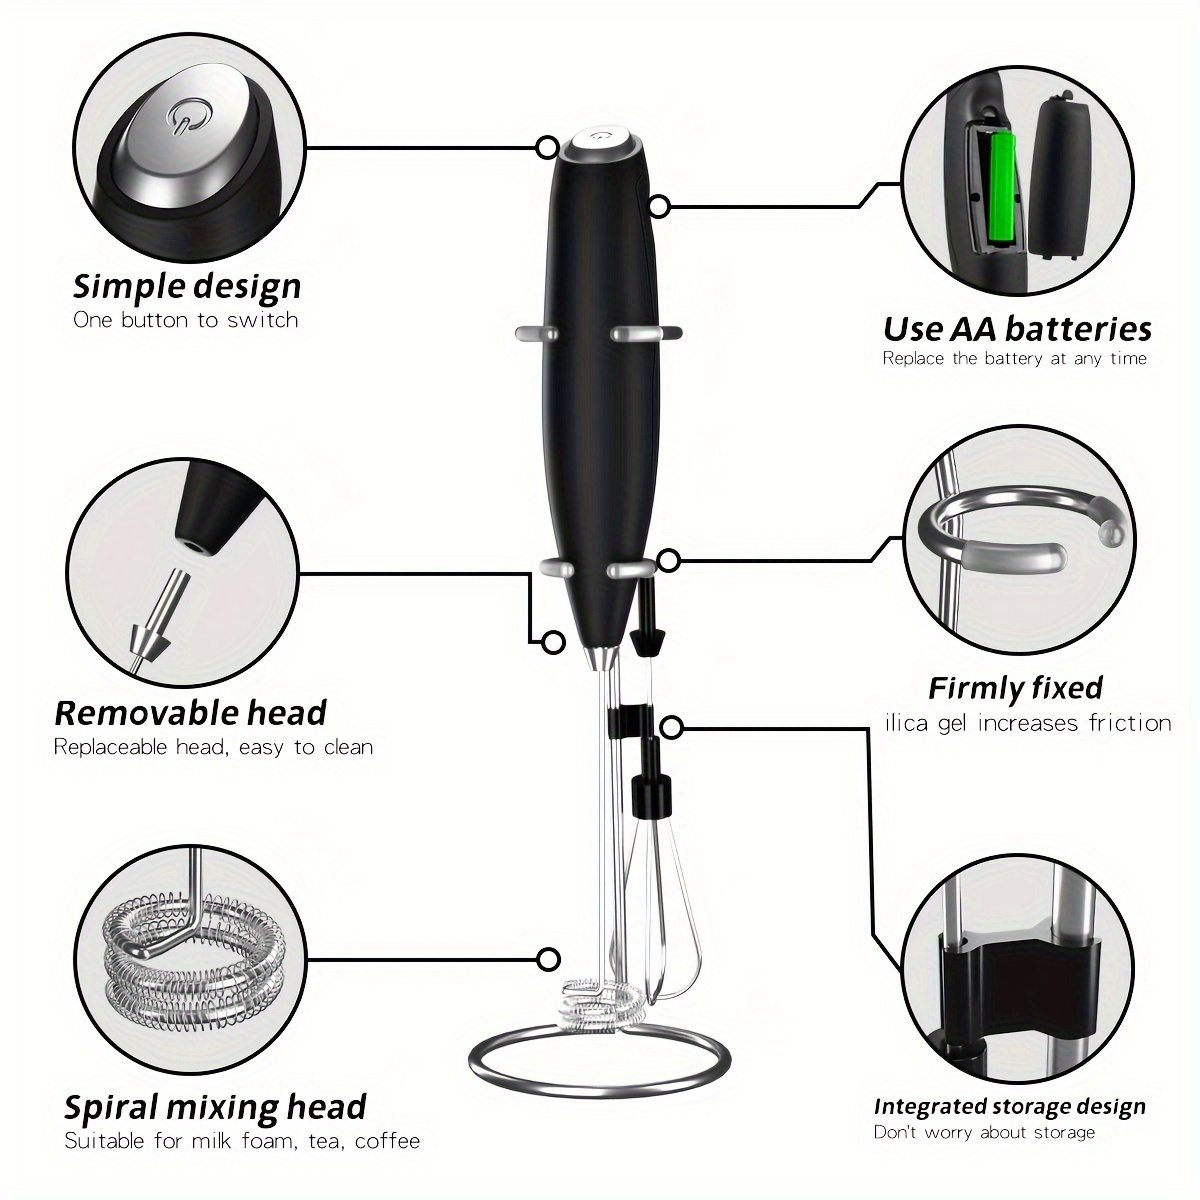 Double Whisk Milk Frother Handheld - Black, Upgrade Motor, Foam Maker for  Matcha, High Powered Drink Mixer for Coffee 